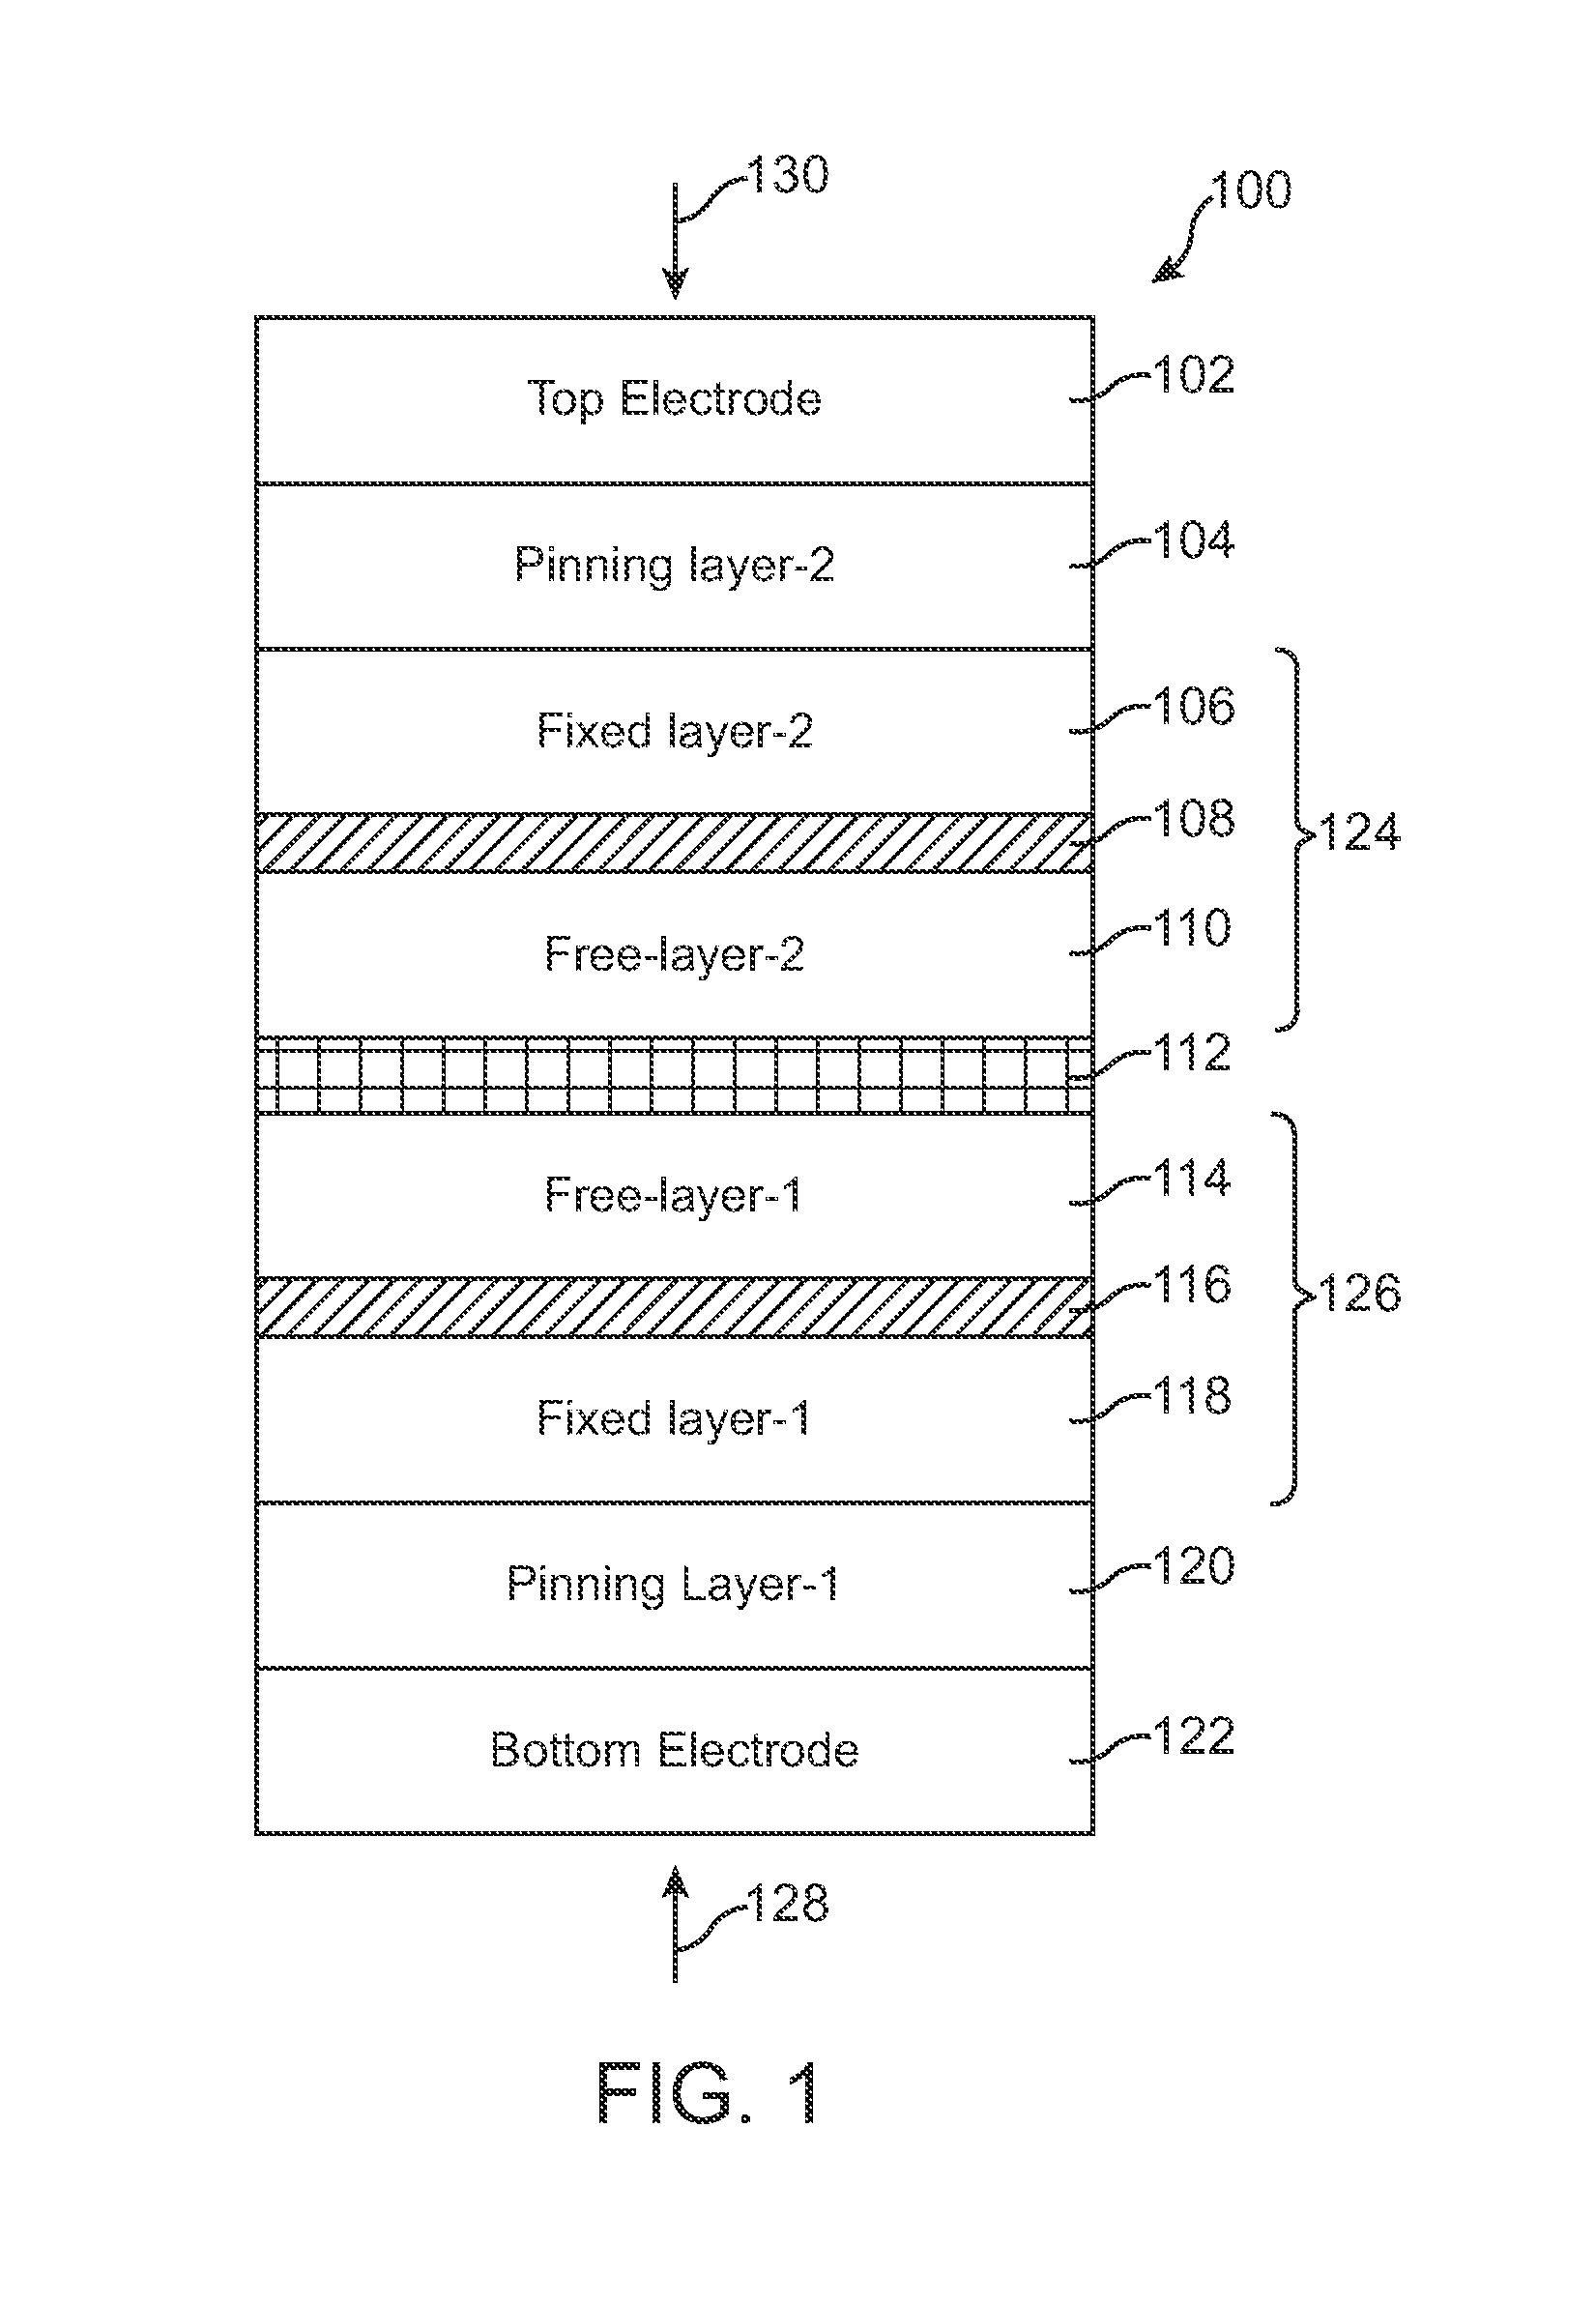 High Capacity Low Cost Multi-State Magnetic Memory